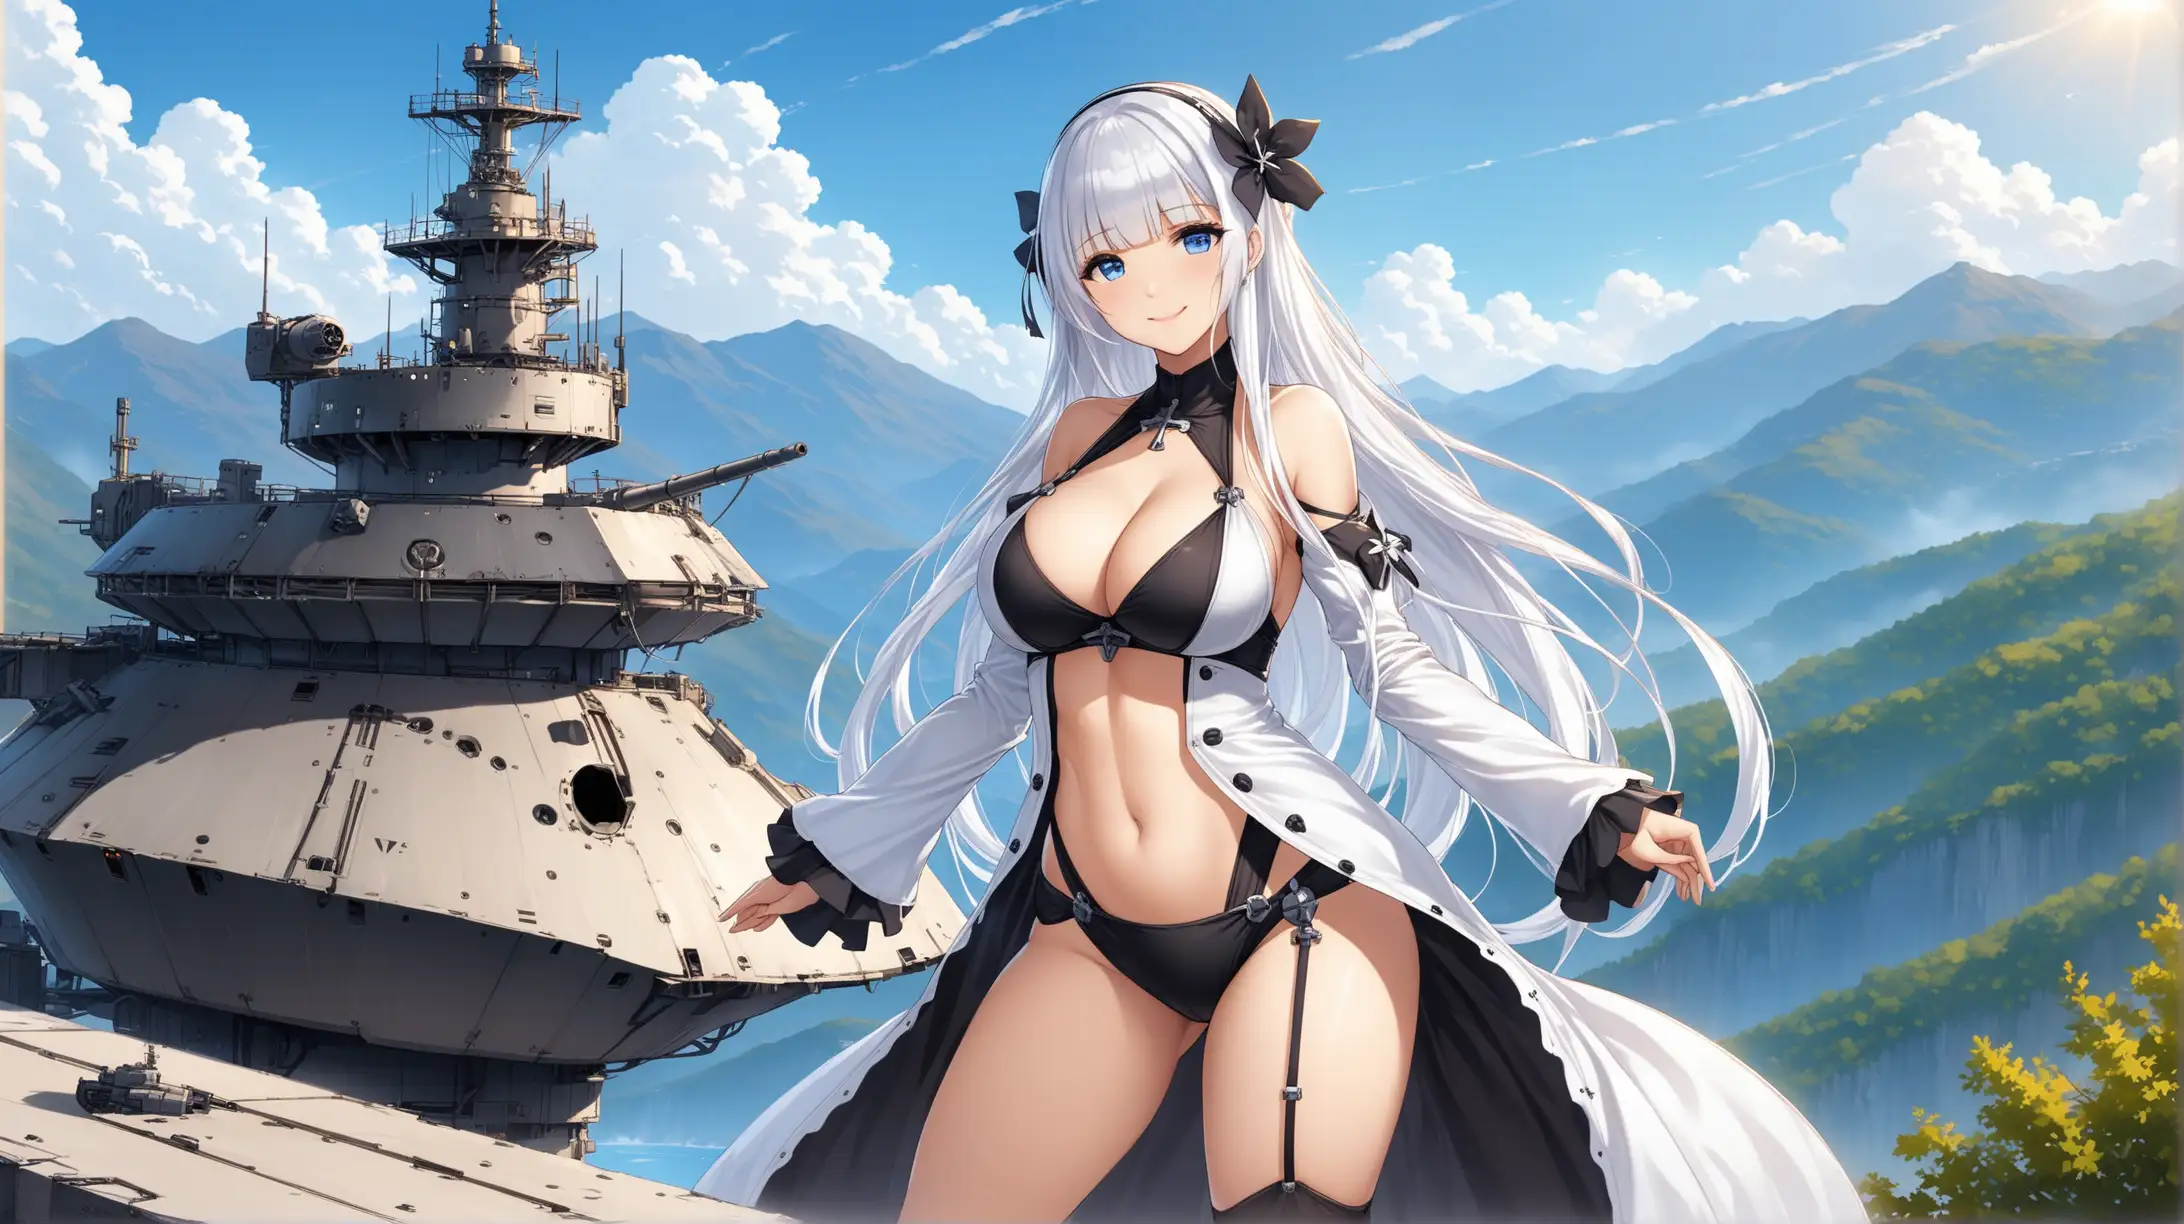 Illustrious from Azur Lane in Seductive Falloutinspired Outfit Outdoors